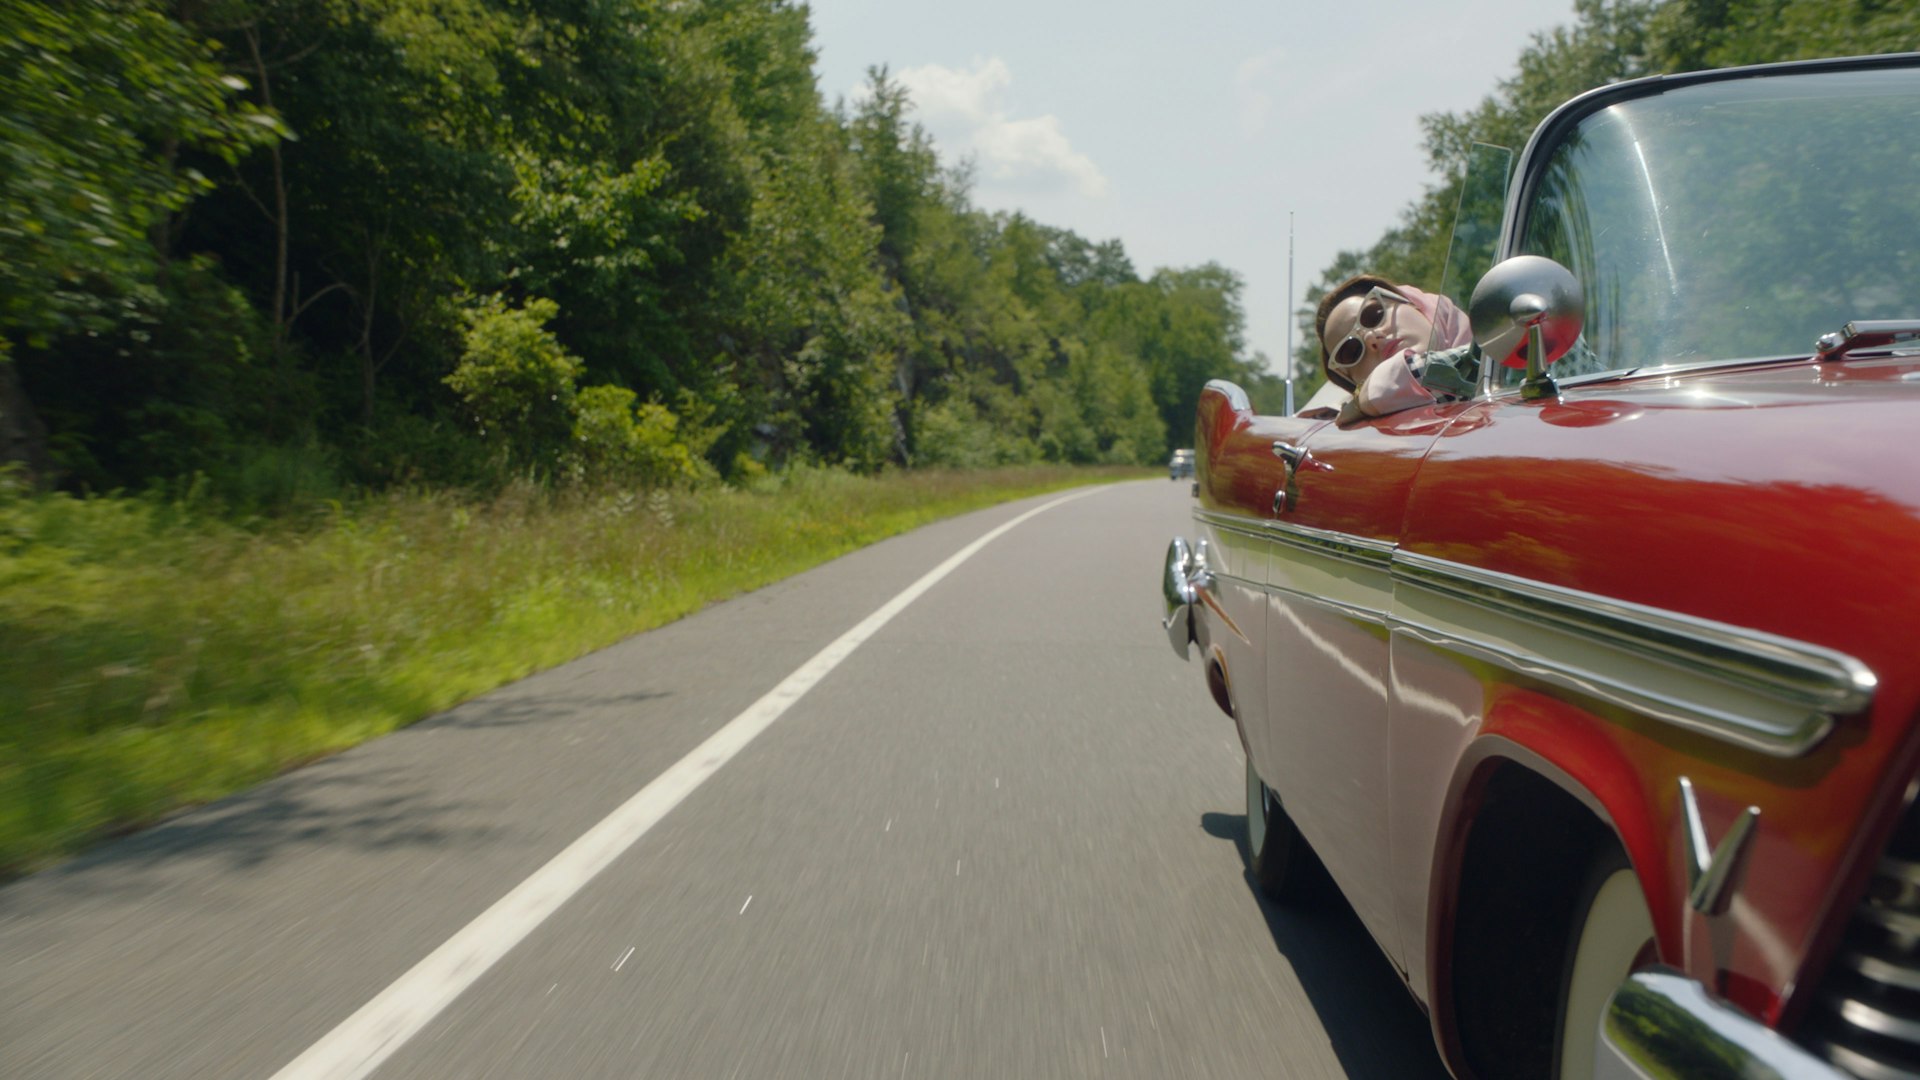 Midge Maisel in a classic red car driving through forests